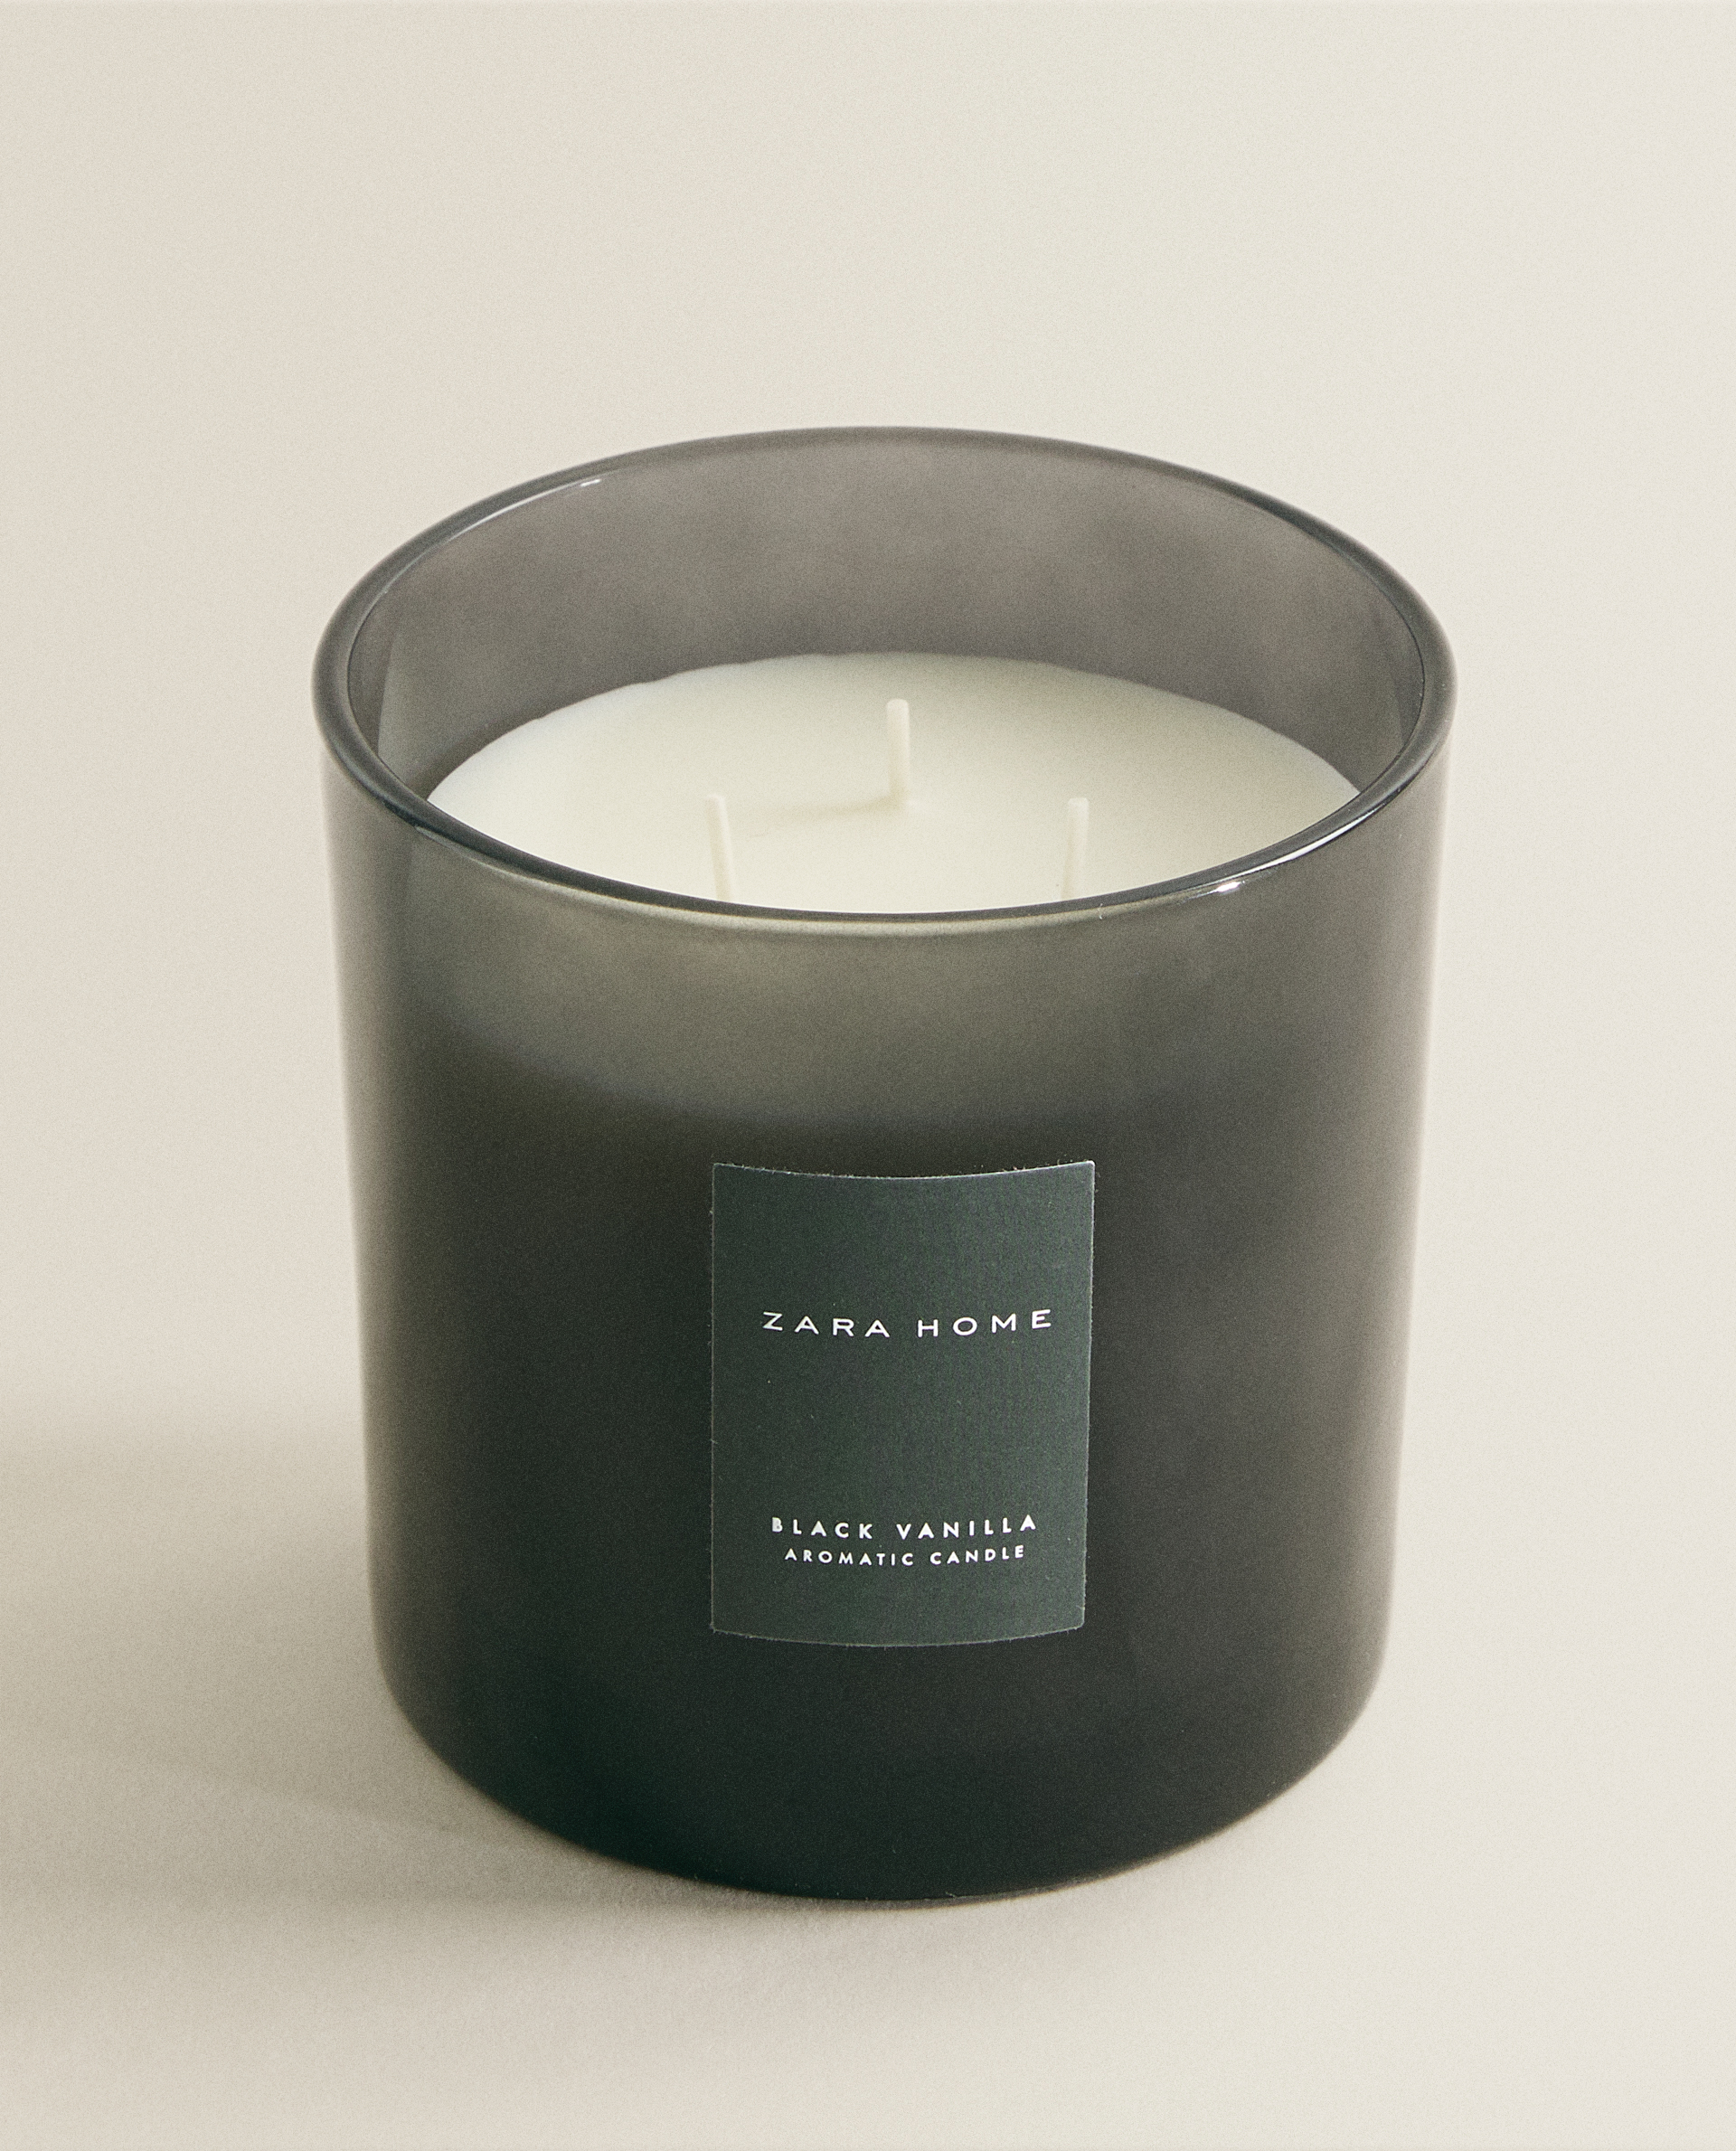 vanilla scented candle